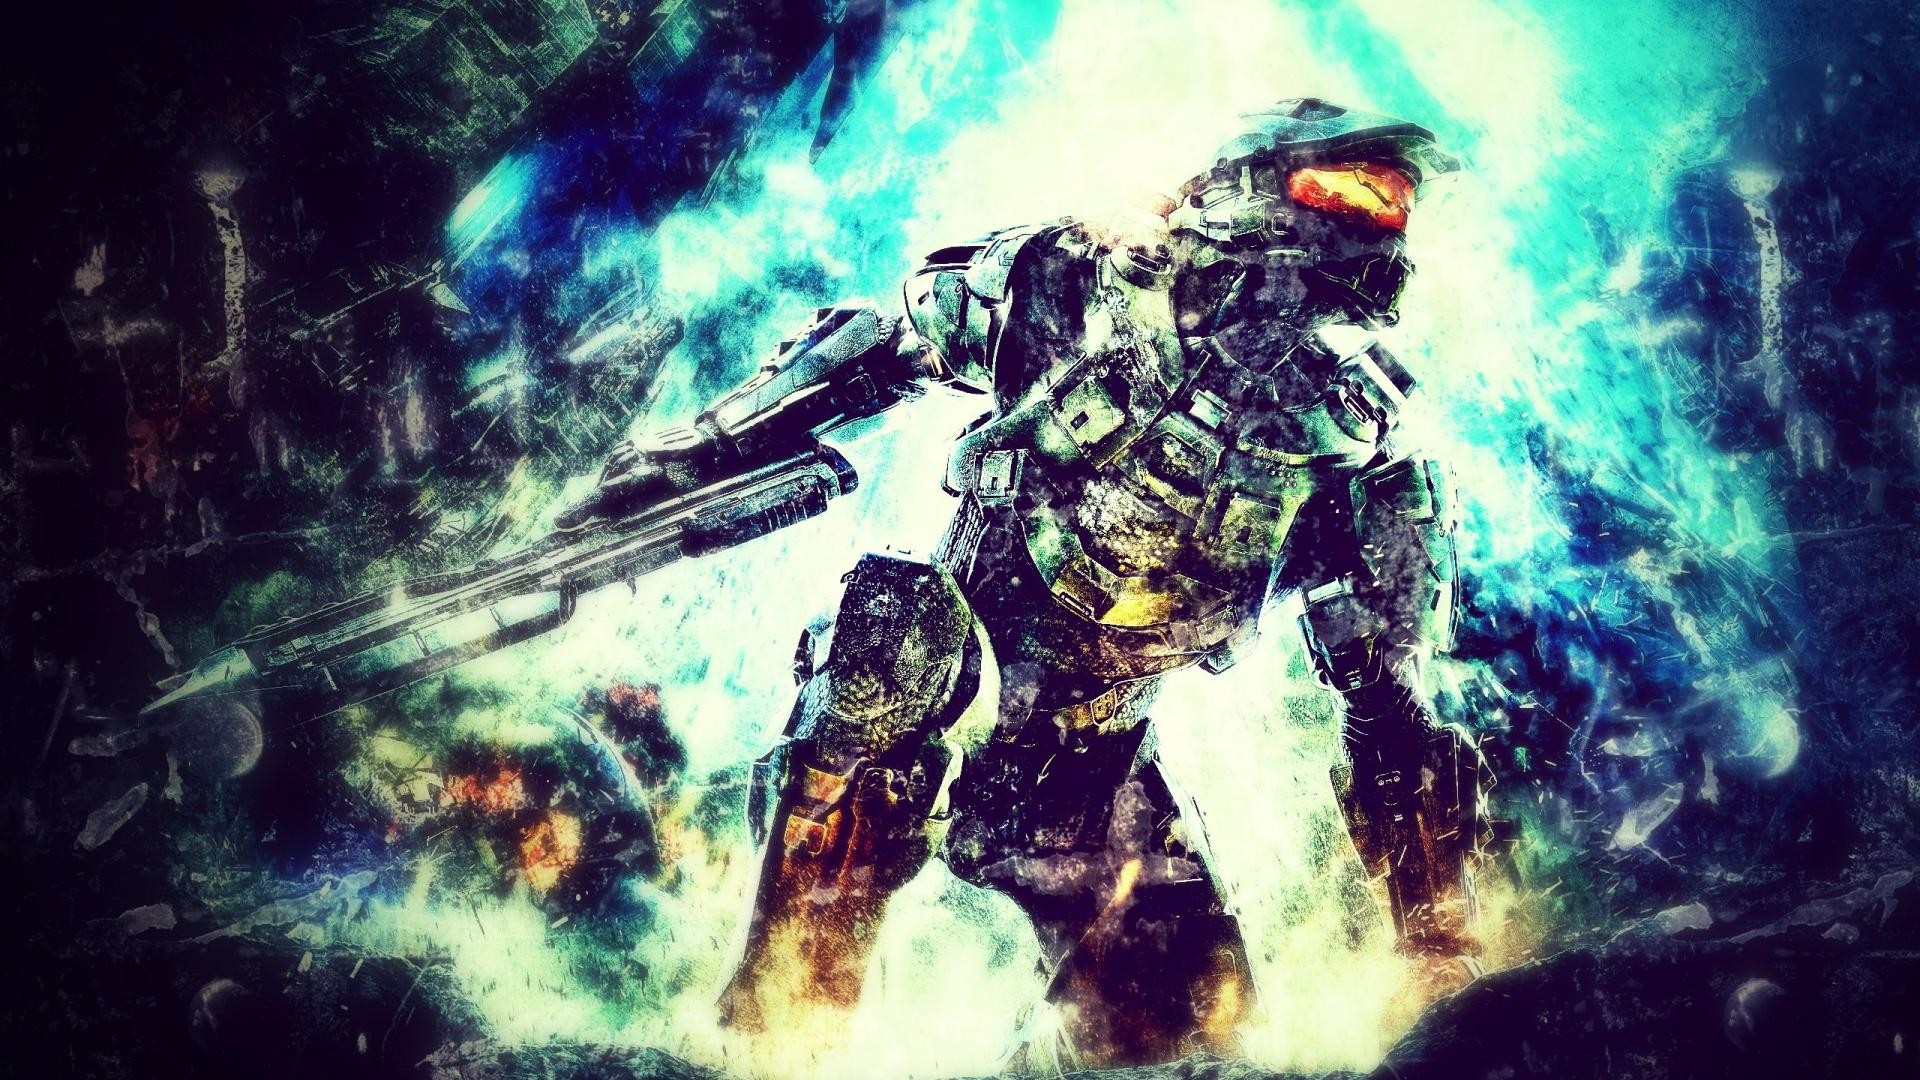 General 1920x1080 video games Halo (game) Halo 4 low-angle cyan video game men video game art Science Fiction Men science fiction weapon artwork Master Chief (Halo) armor